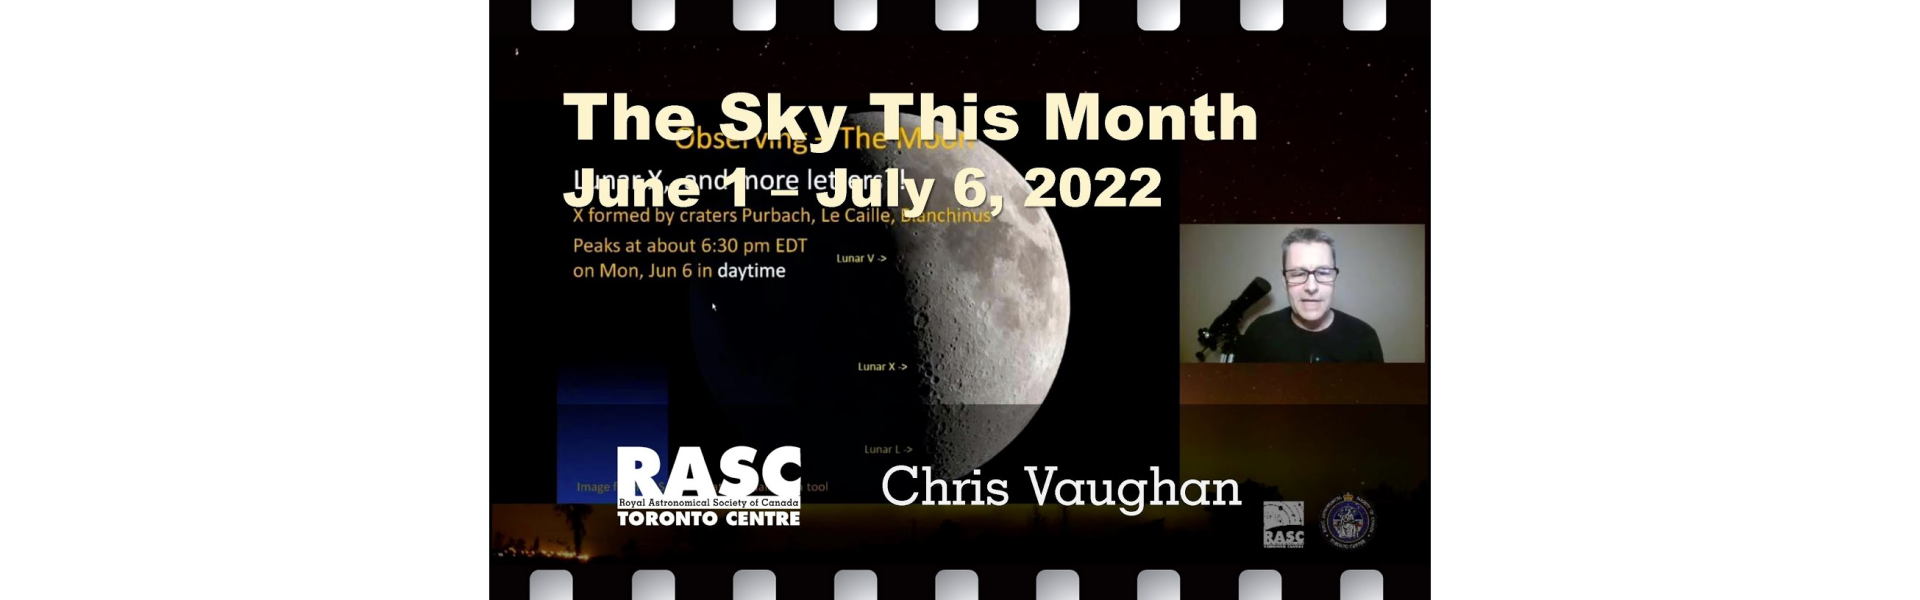 The Sky This Month, June 1 - July 6, 2022 with Chris Vaughan